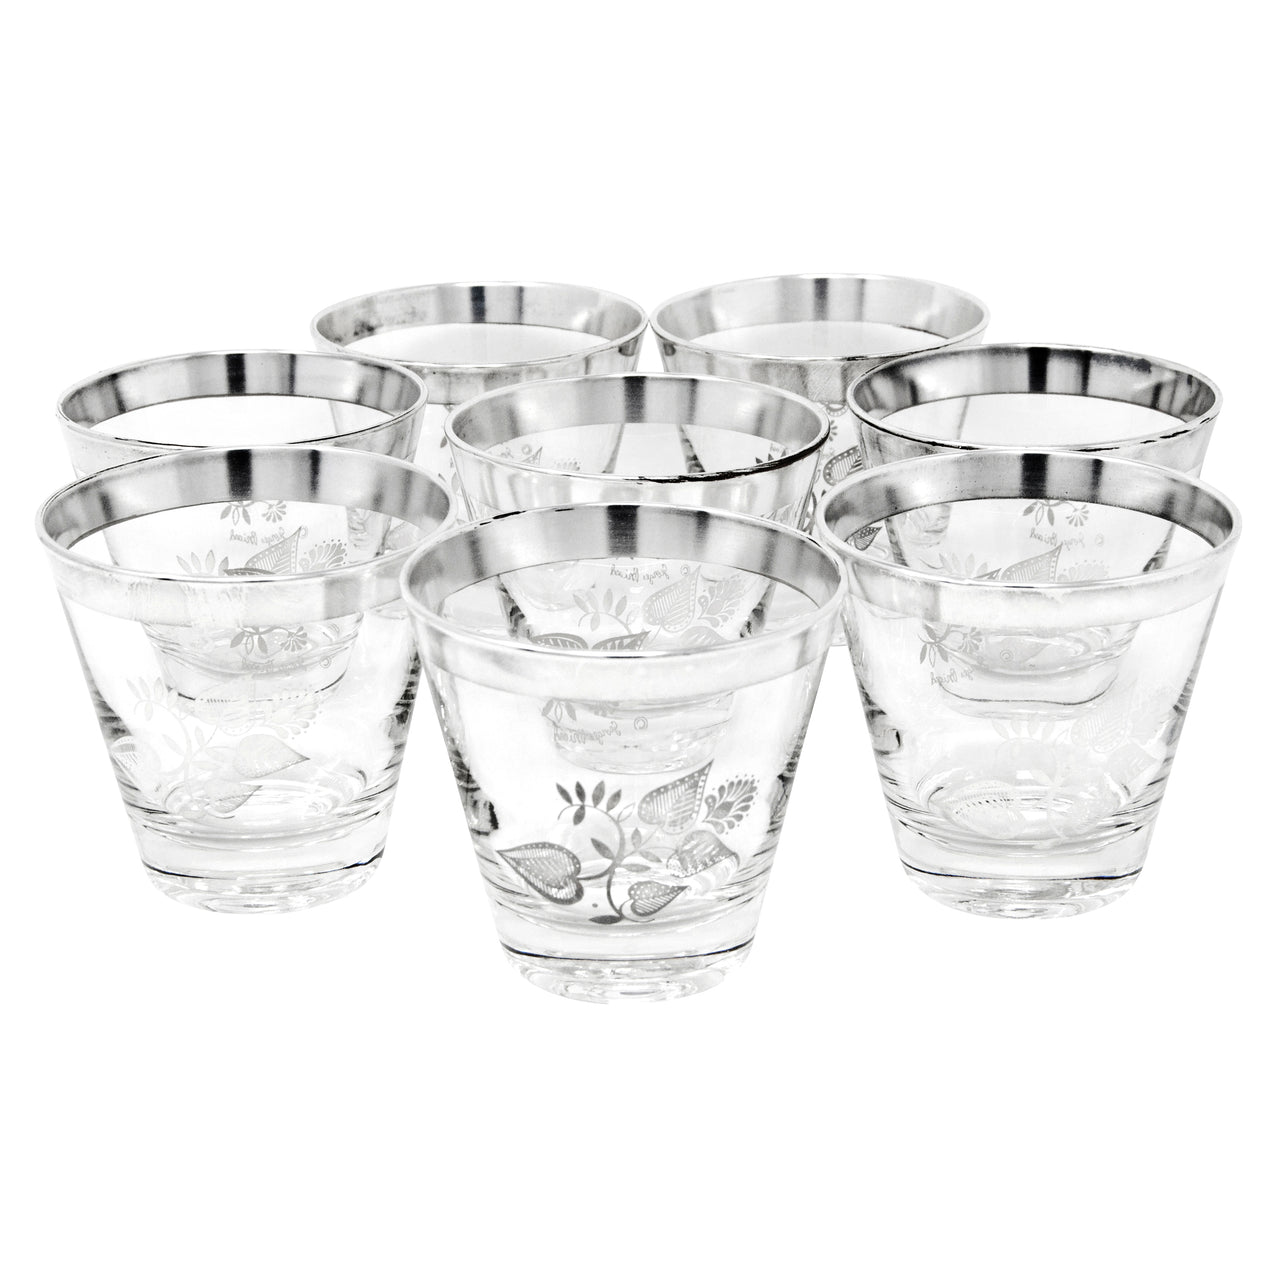 Georges Briard Sterling Leaf Old Fashioned Glasses